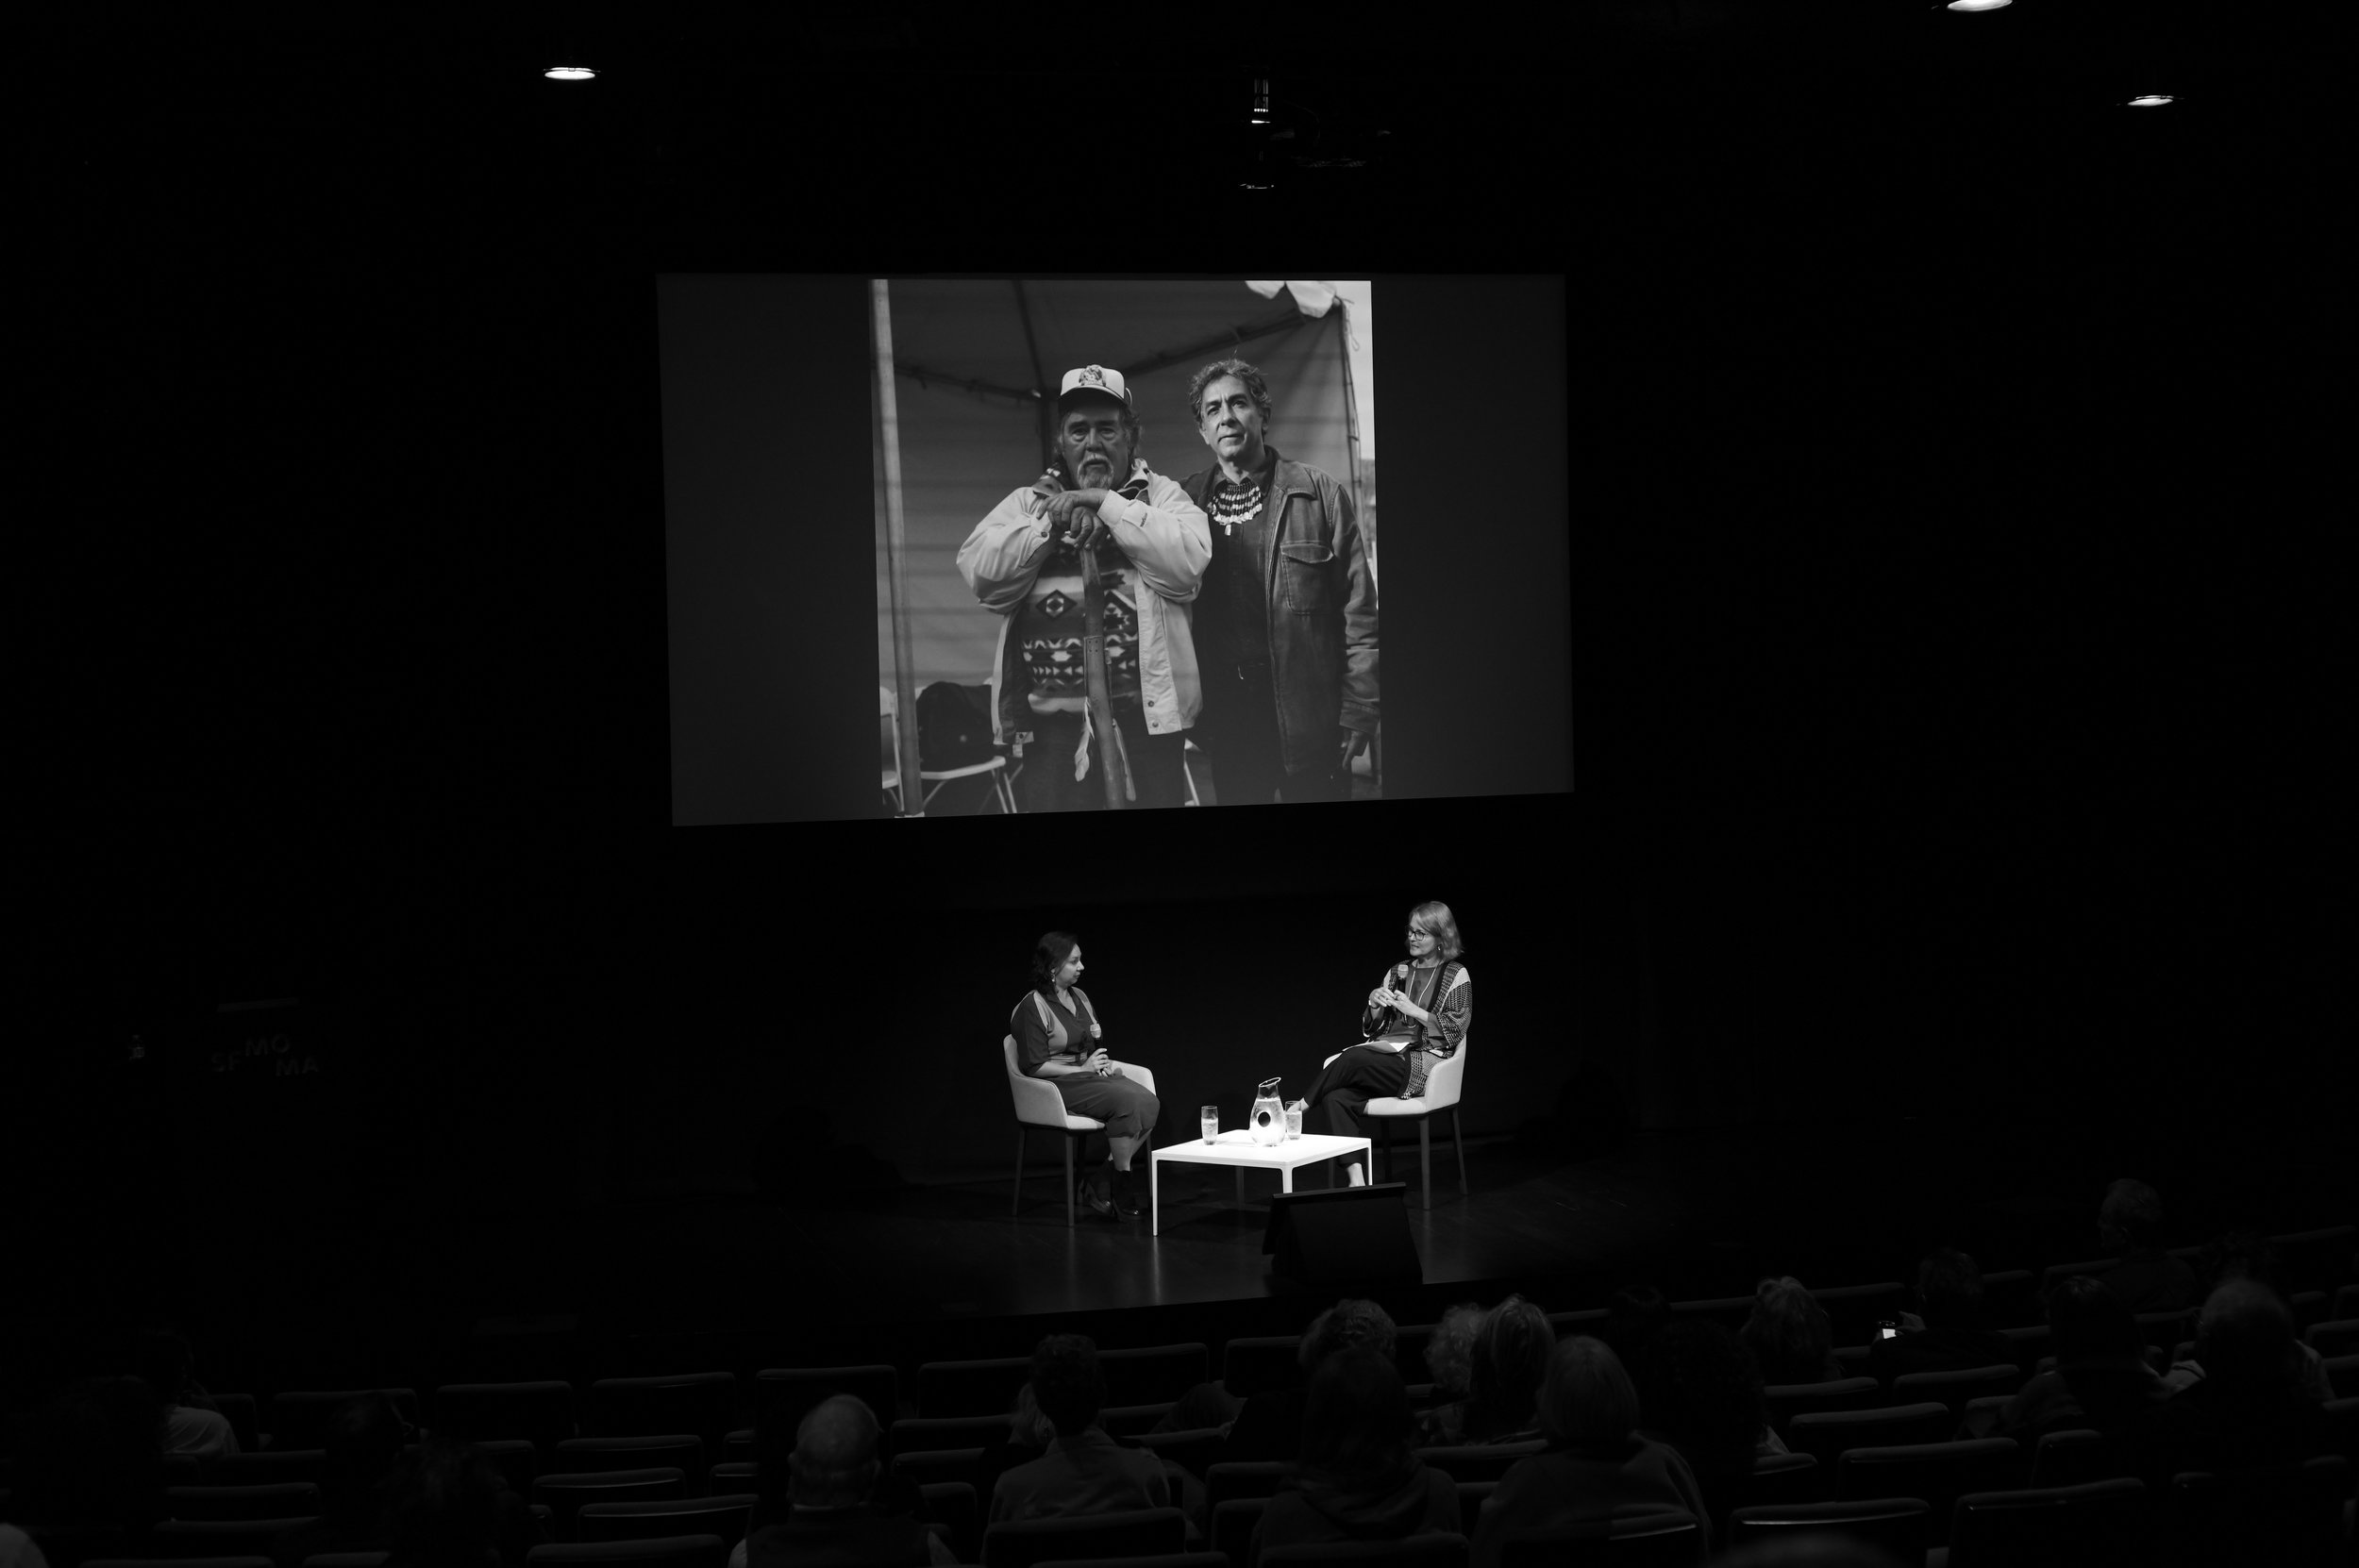 Mercedes Dorame in conversation with Erin O’Toole about her works in the exhibition Kinship: Photography and Connection. SFMOMA, September 21, 2023.